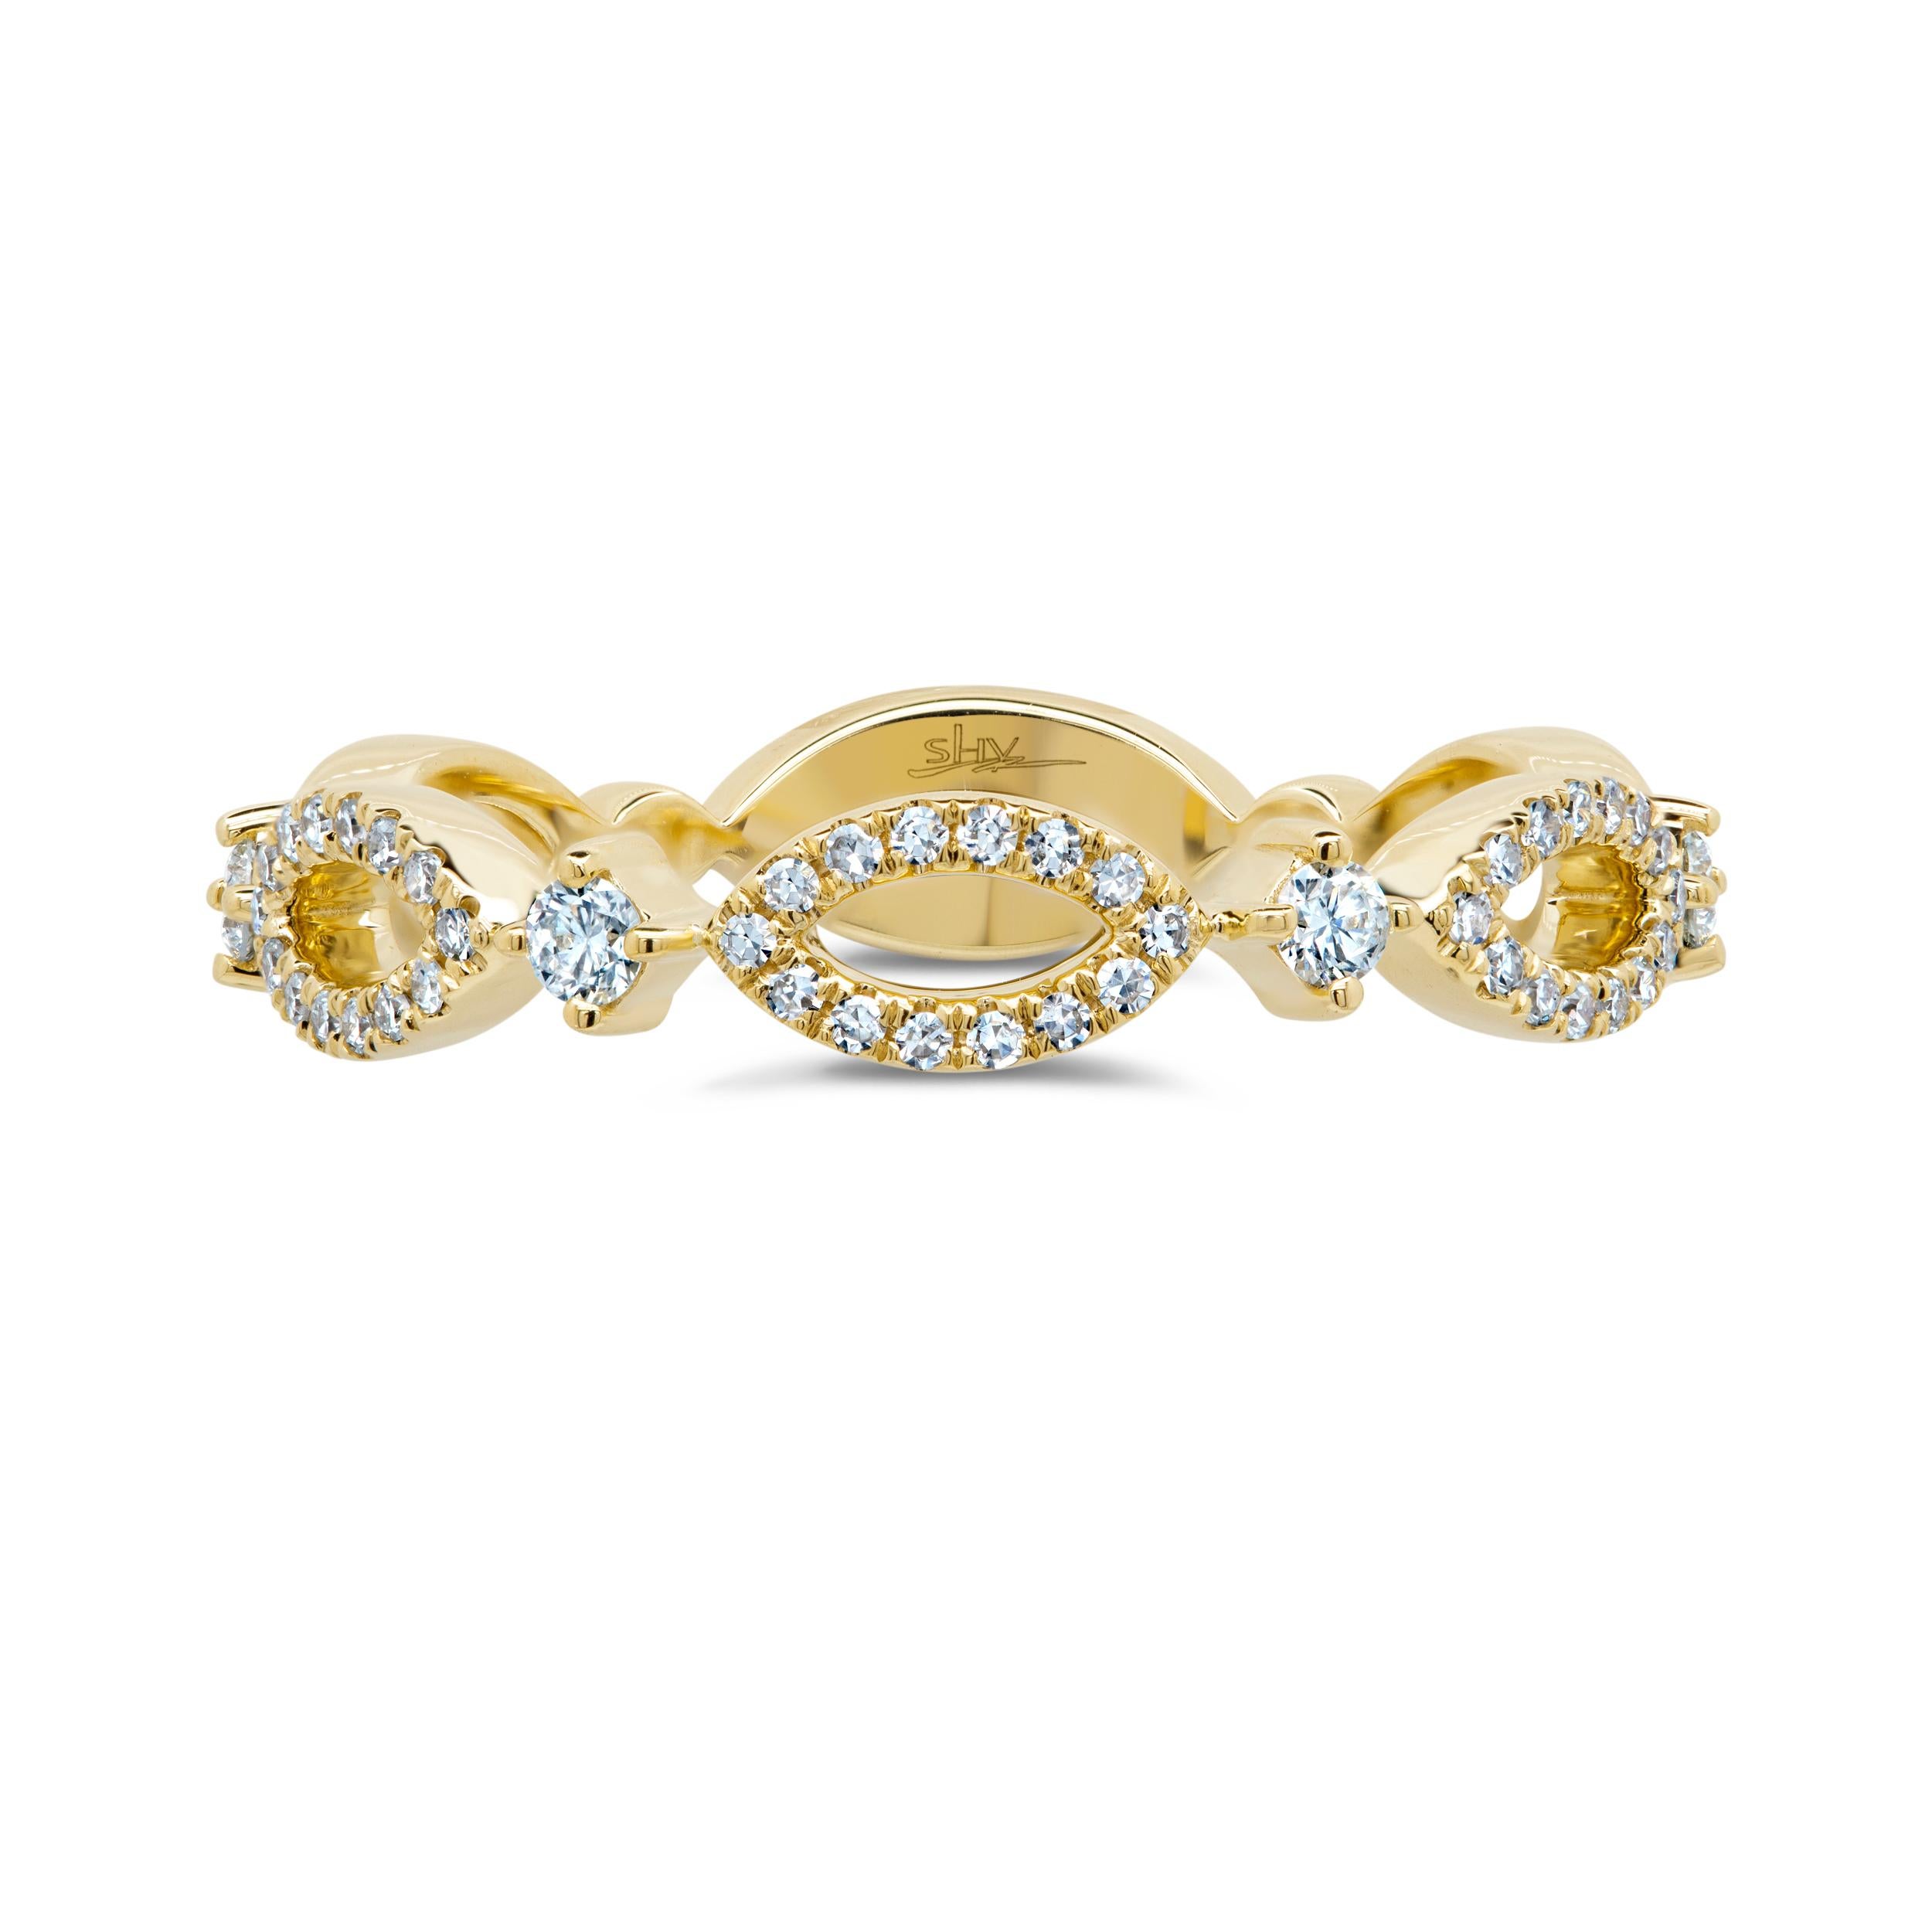 This beautiful modern ladies ring crafted in 14k yellow gold features sparkling diamonds with a total carat weight of 0.22. This timeless beauty can be a great addition to your jewelry collection. The ring is size 7, width: 22.2mm, height: 3.9mm,